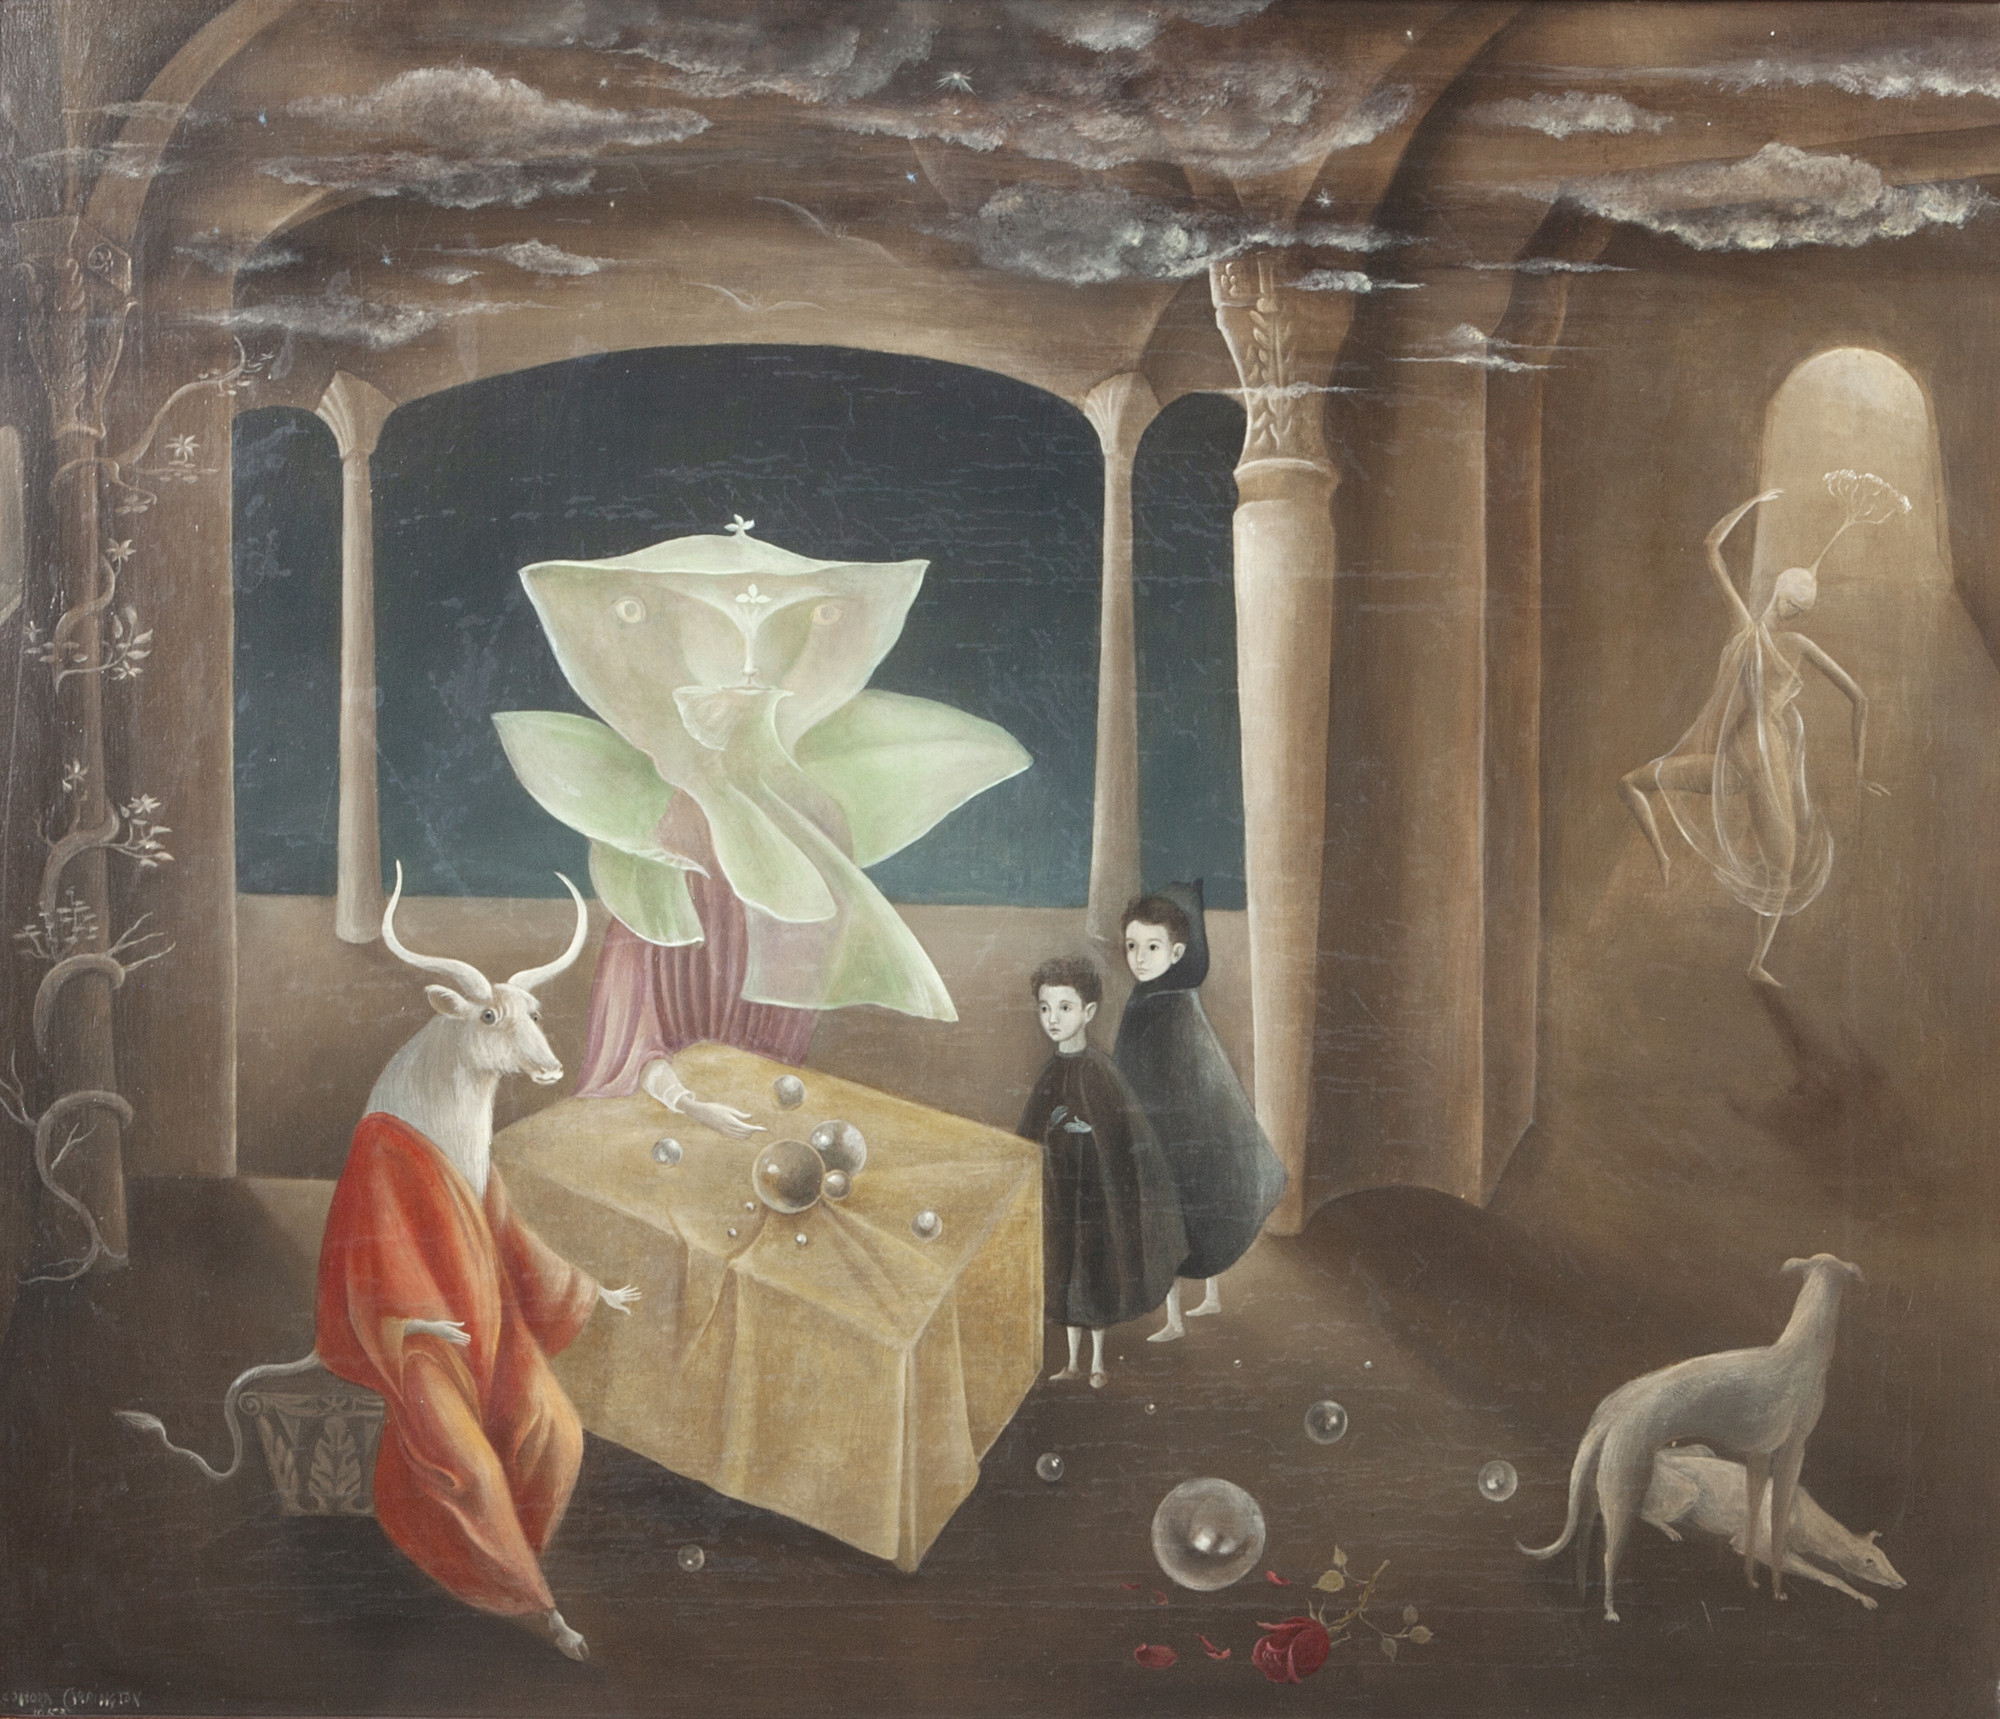 And Then We Saw the Daughter of The Minotaur, by Leonora Carrington 1953